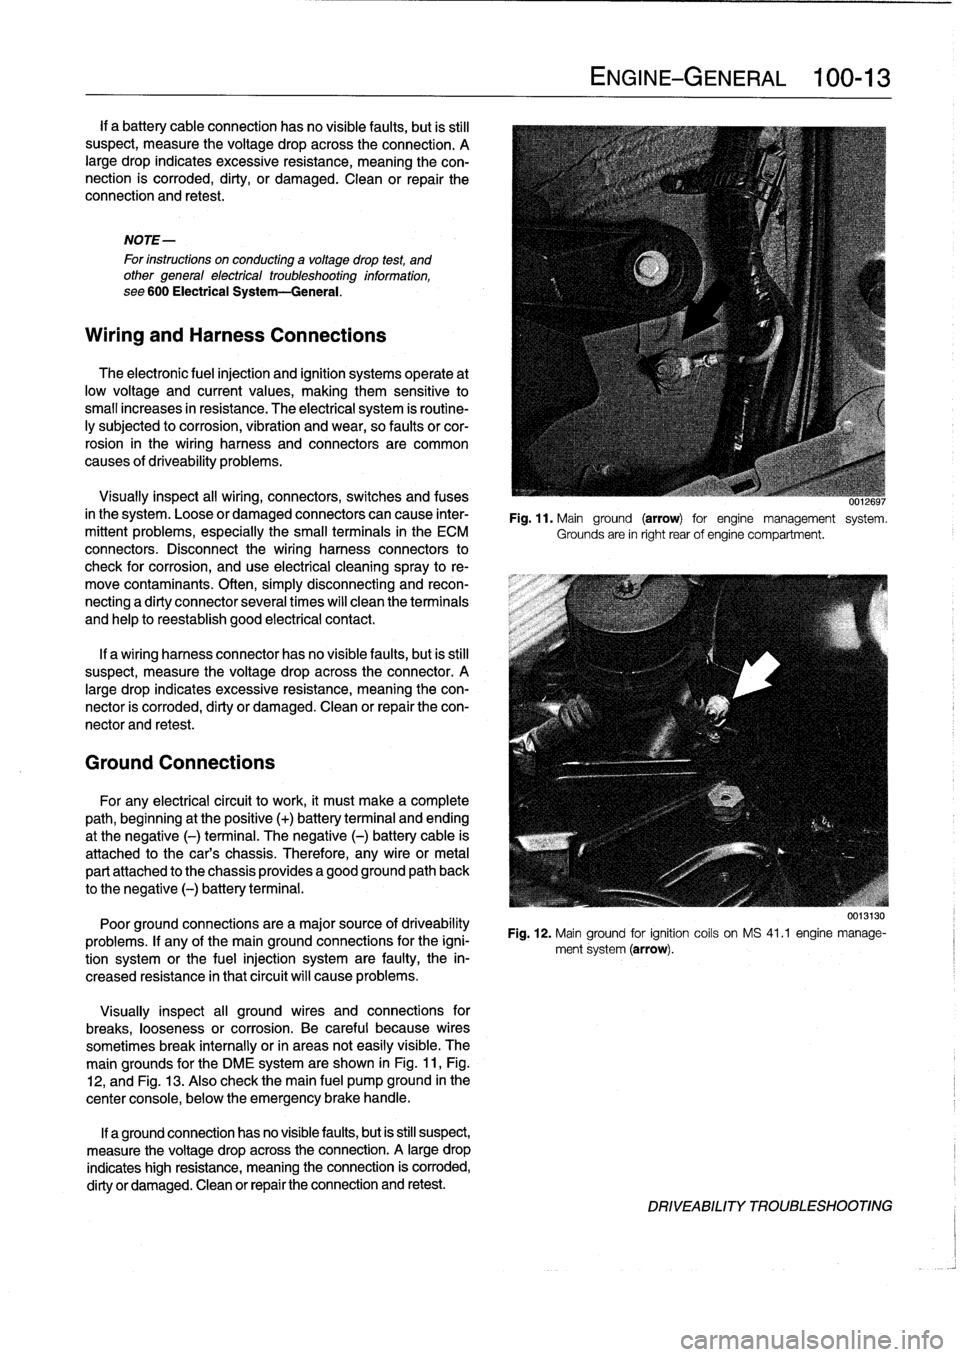 BMW 328i 1997 E36 Workshop Manual 
If
a
battery
cableconnection
hasno
visible
faults,
but
is
still
suspect,
measure
the
voltage
drop
across
the
connection
.
A
large
drop
indicates
excessive
resistance,
meaning
the
con-
nection
is
corr